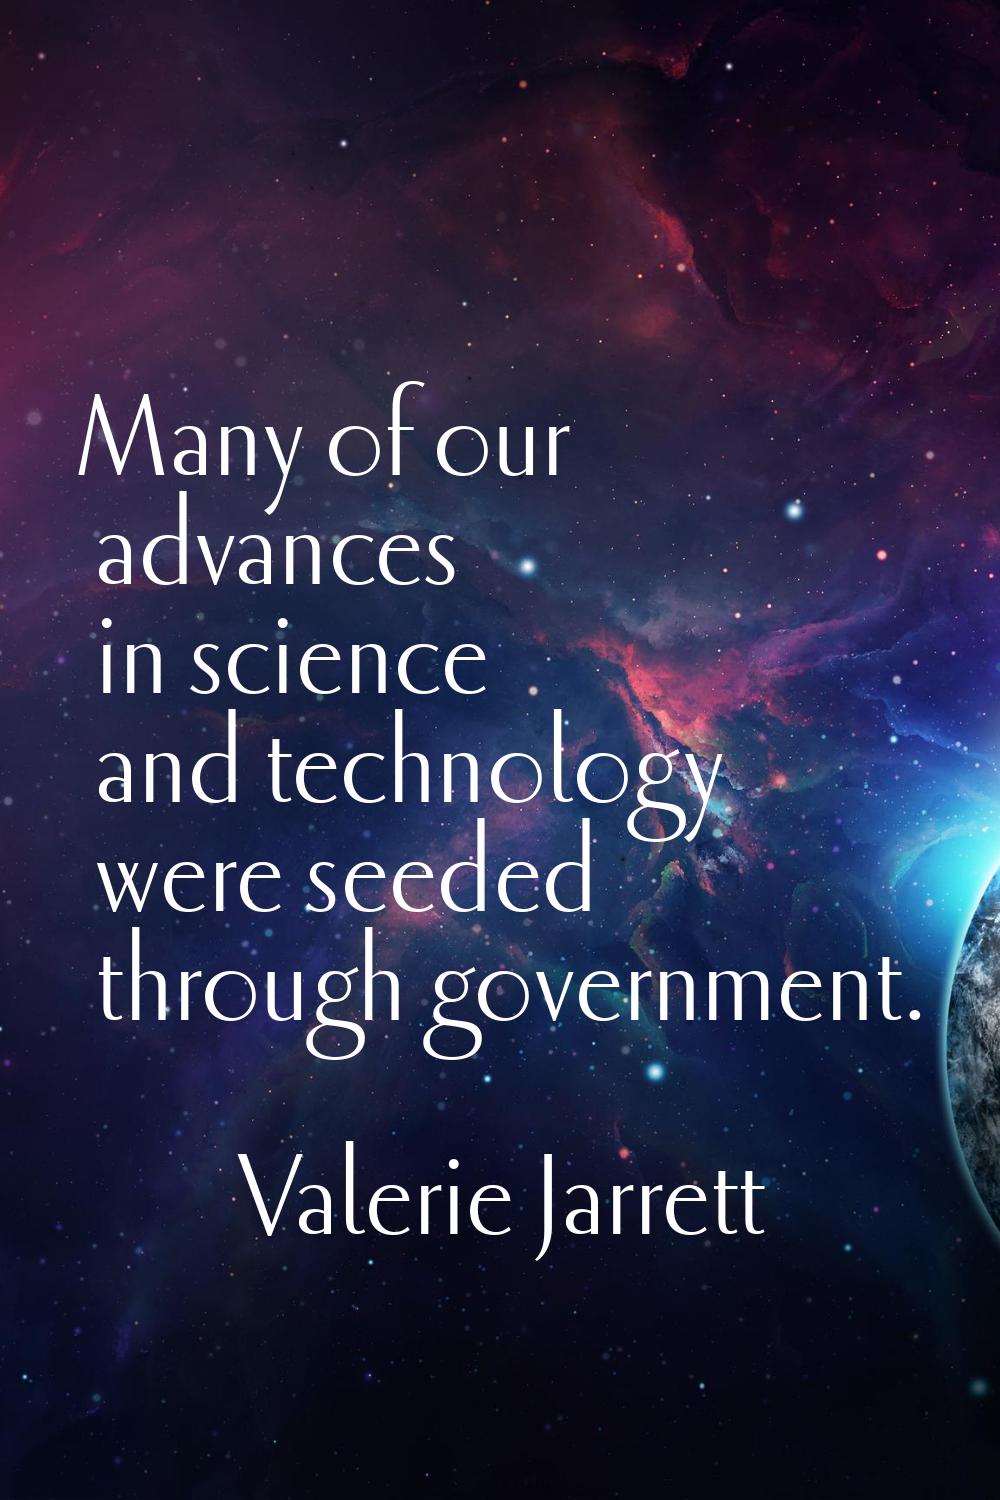 Many of our advances in science and technology were seeded through government.